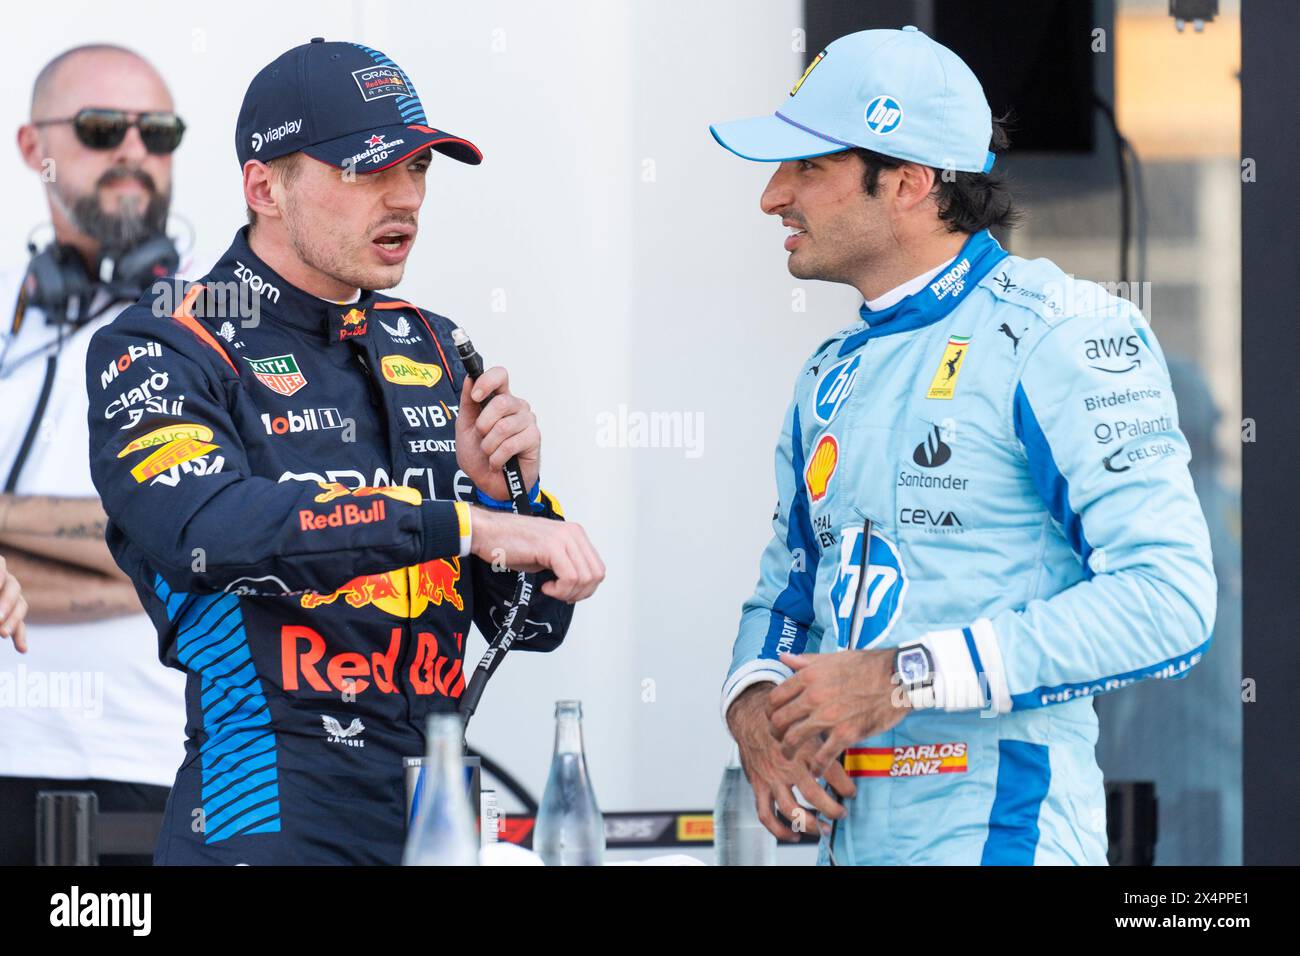 Miami Gardens, United States. 04th May, 2024. Dutch Formula One driver Max Verstappen of Red Bull Racing speaks with Spanish Formula One driver Carlos Sainz Jr. of Scuderia Ferrari following qualifying for the Formula One Miami Grand Prix at the Miami International Autodrome in Miami Gardens, Florida on Saturday, May 4, 2024 Photo by Greg Nash/UPI. Credit: UPI/Alamy Live News Stock Photo